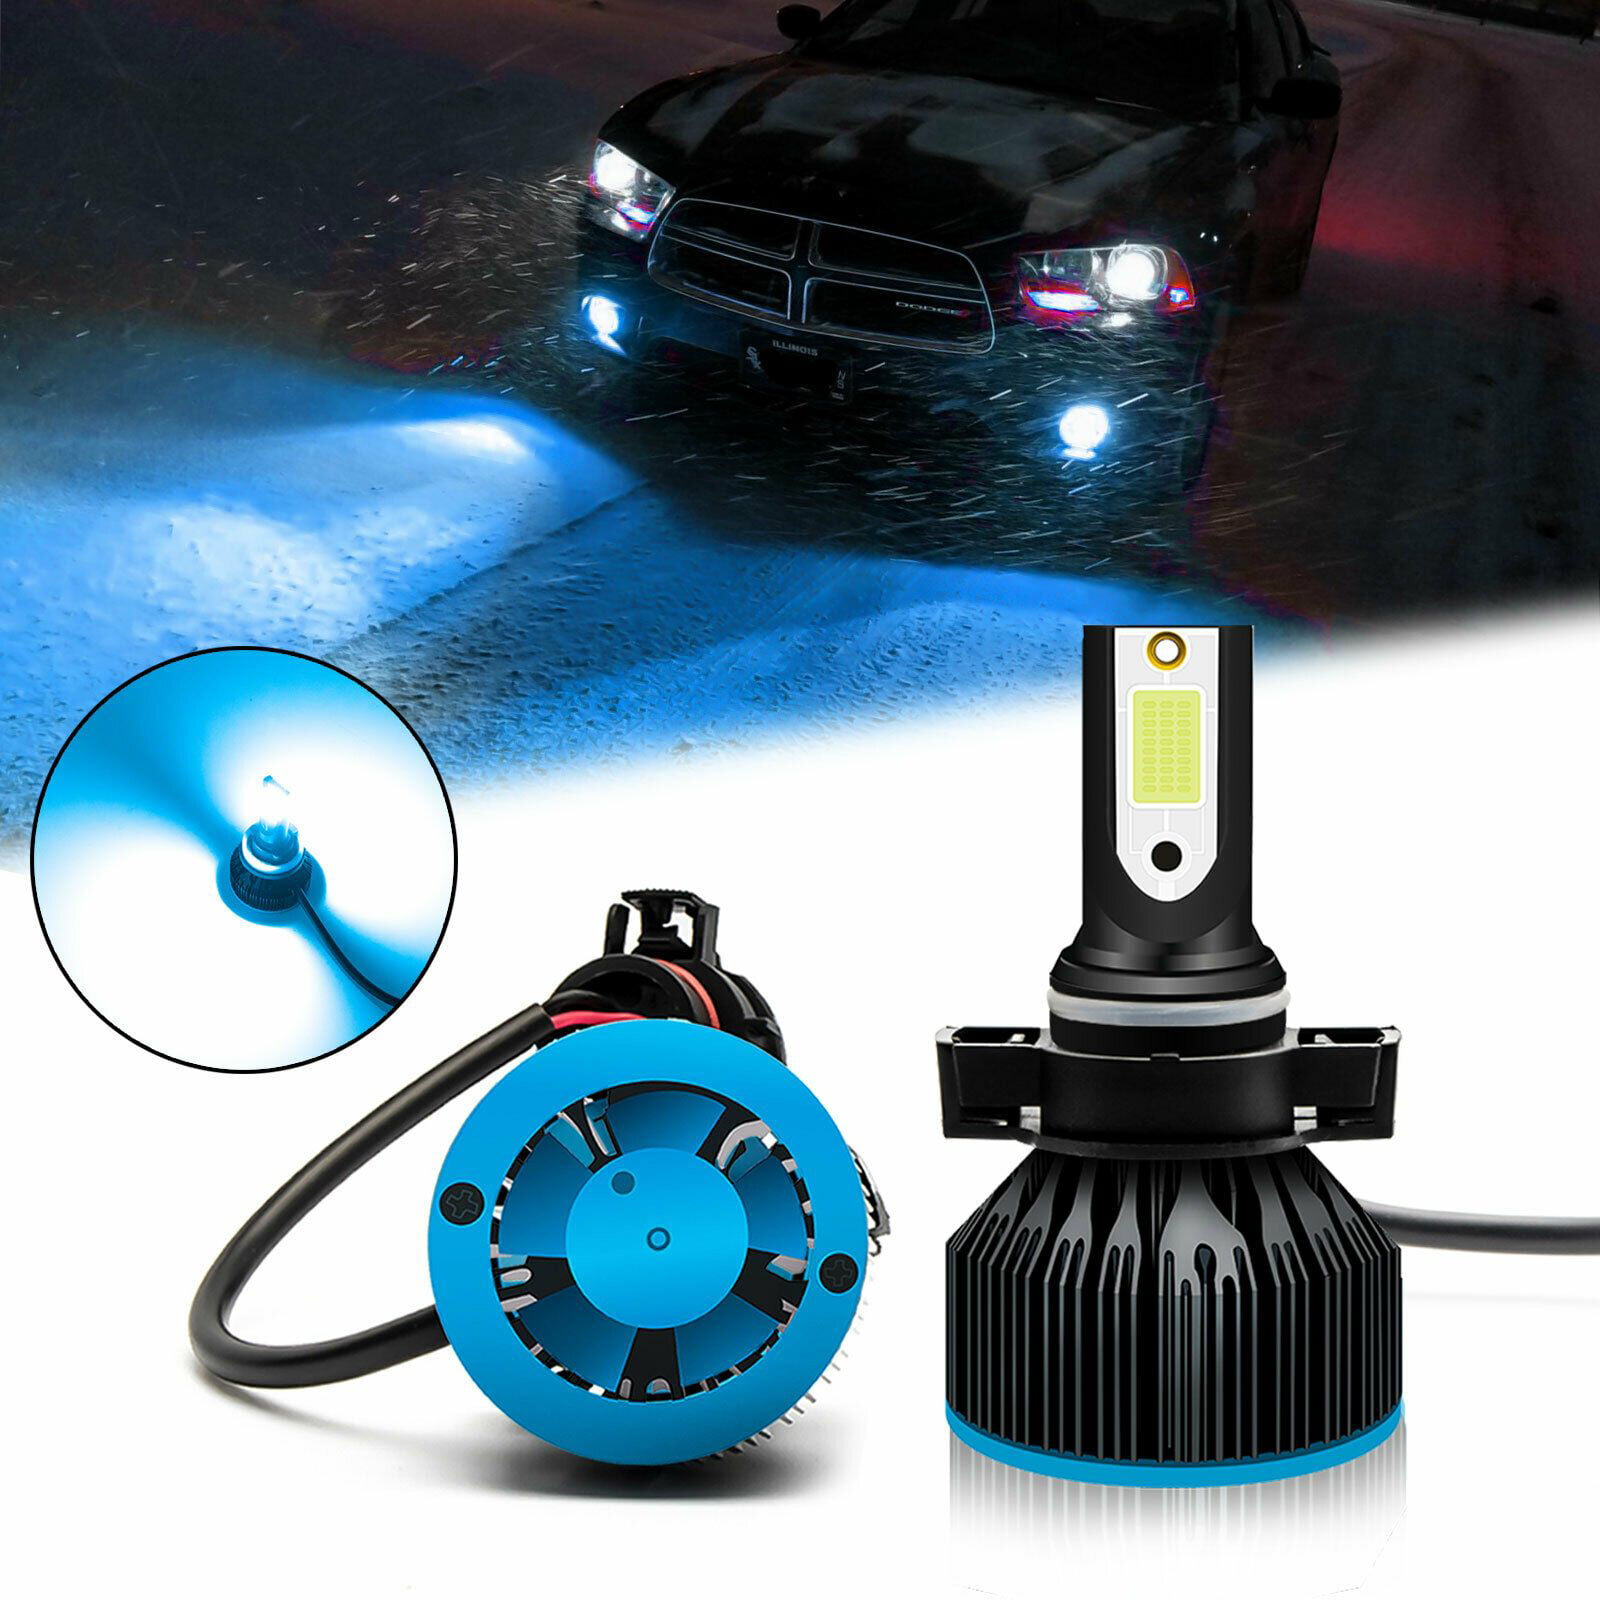 Fog Light H3 LED Bulbs White 6000K Ice Blue 8000K Dual Color for Trucks Cars Lamps DRL Daytime Running Lights Kit Replacement Bulb 12V 30W 2800LM Super Bright COB Chips 1 Year Warranty【1797】 